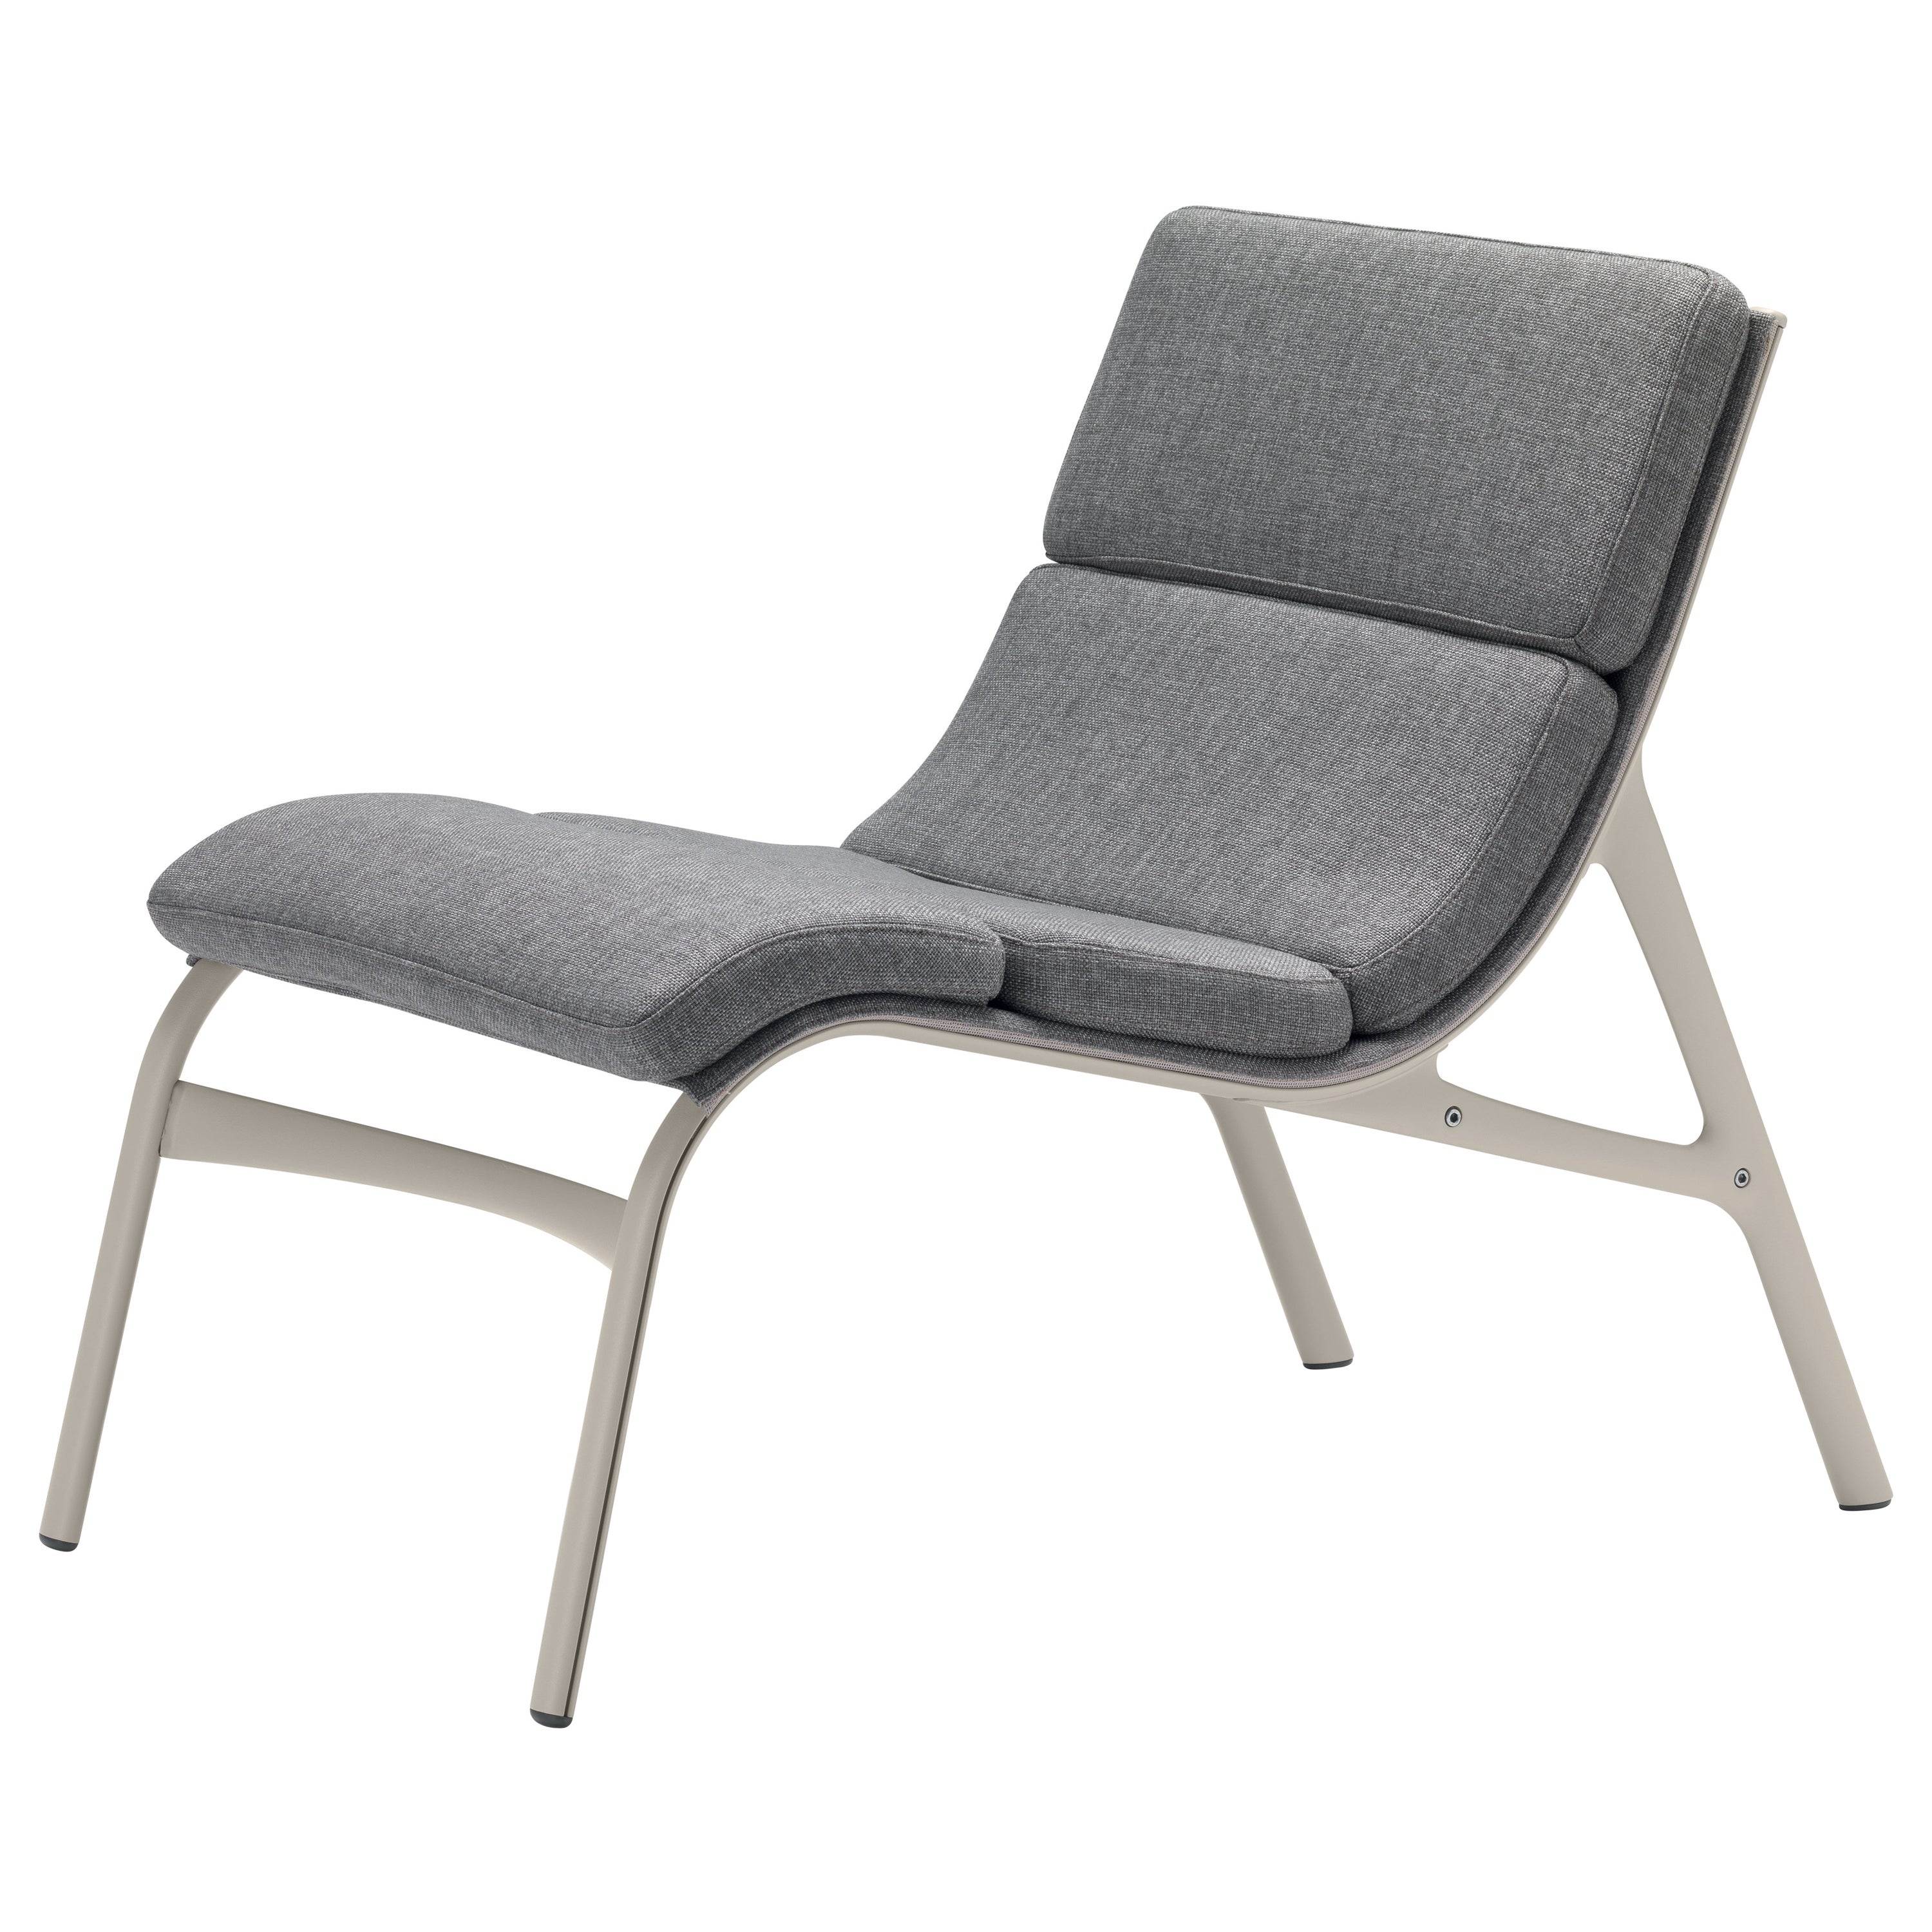 Alias 462 Armframe Soft Chair in Sand Mesh and Grey Seat with Lacquered Frame For Sale